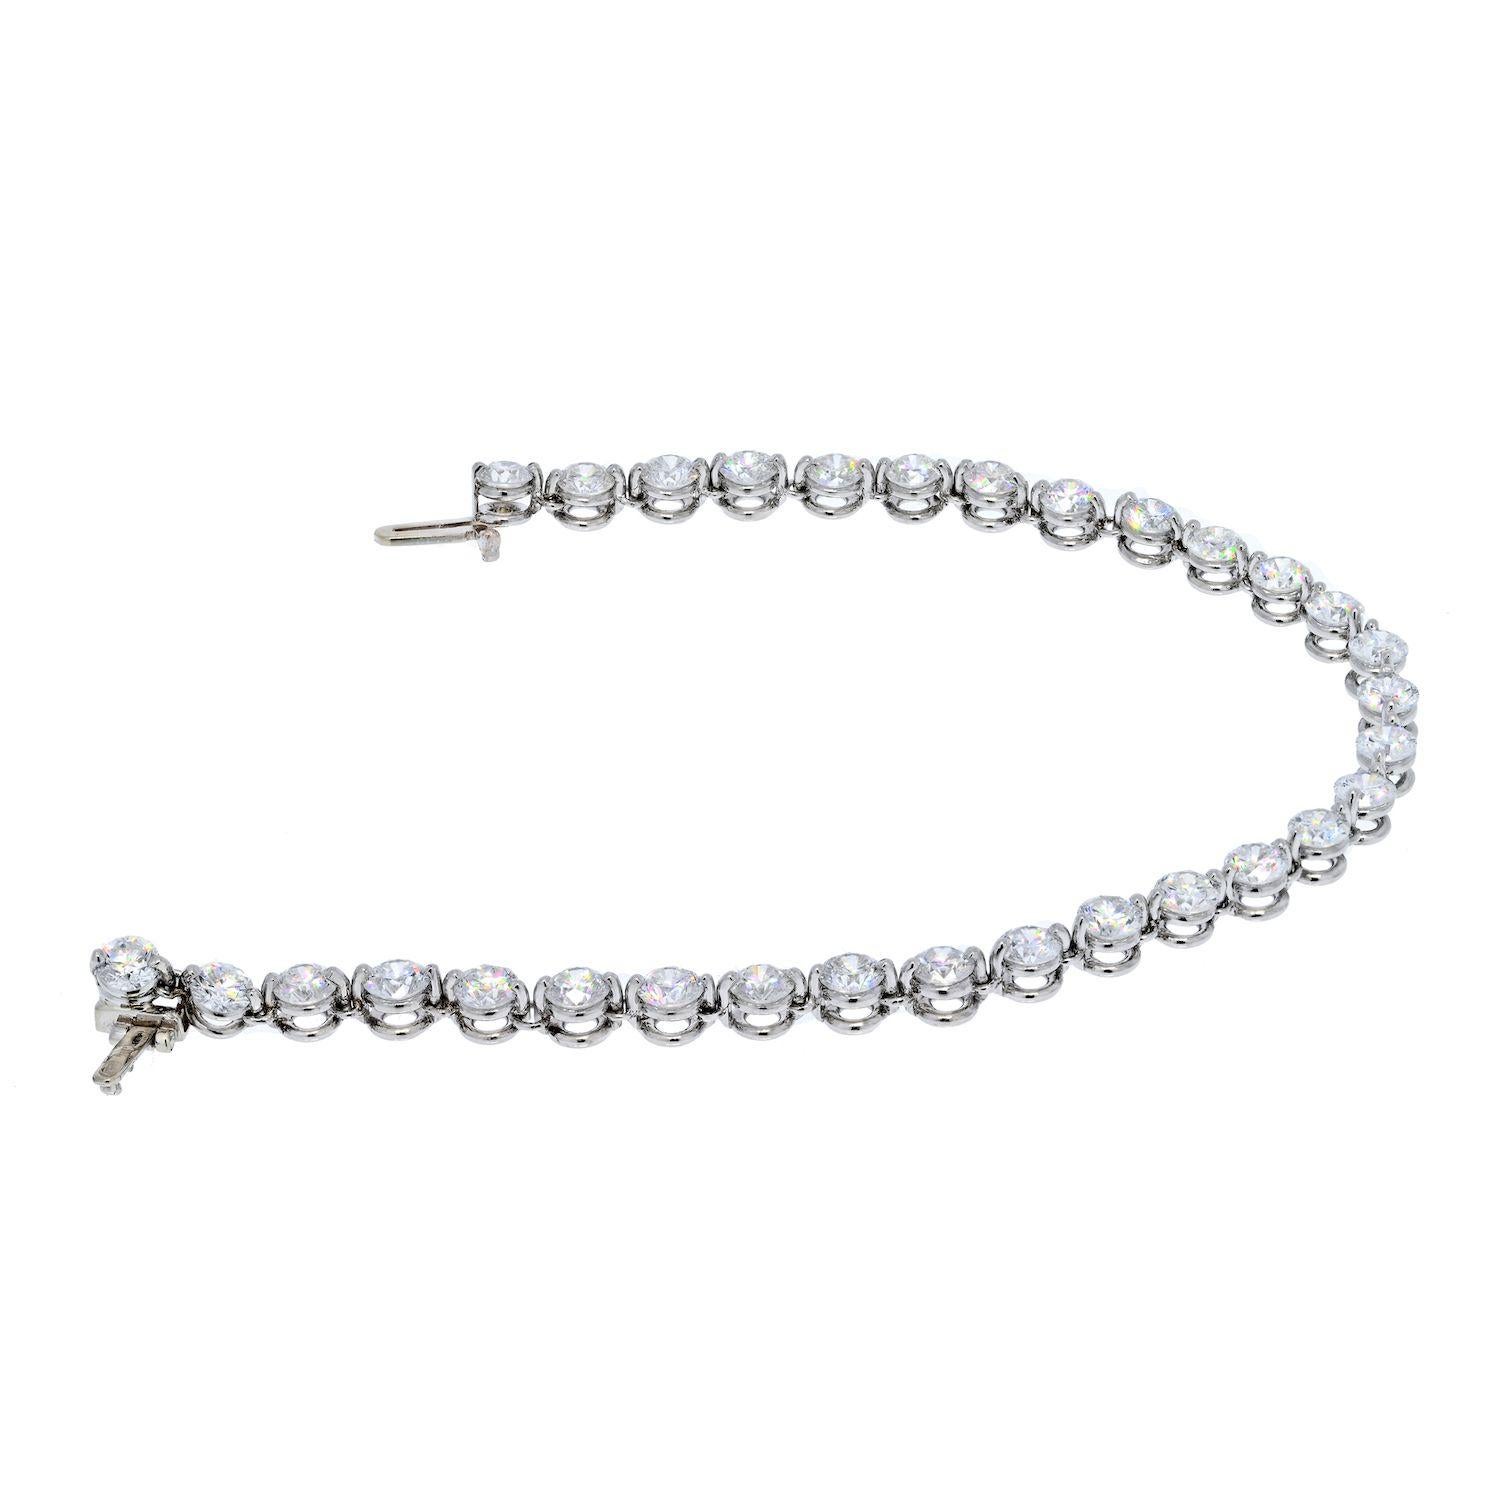 7.48cts Round Brilliant Cut Shared Prong Bracelet. 7 inches long, Single shred prong setting. Smooth and young looking. Sparkly F-G color diamonds, VS-SI clarity.